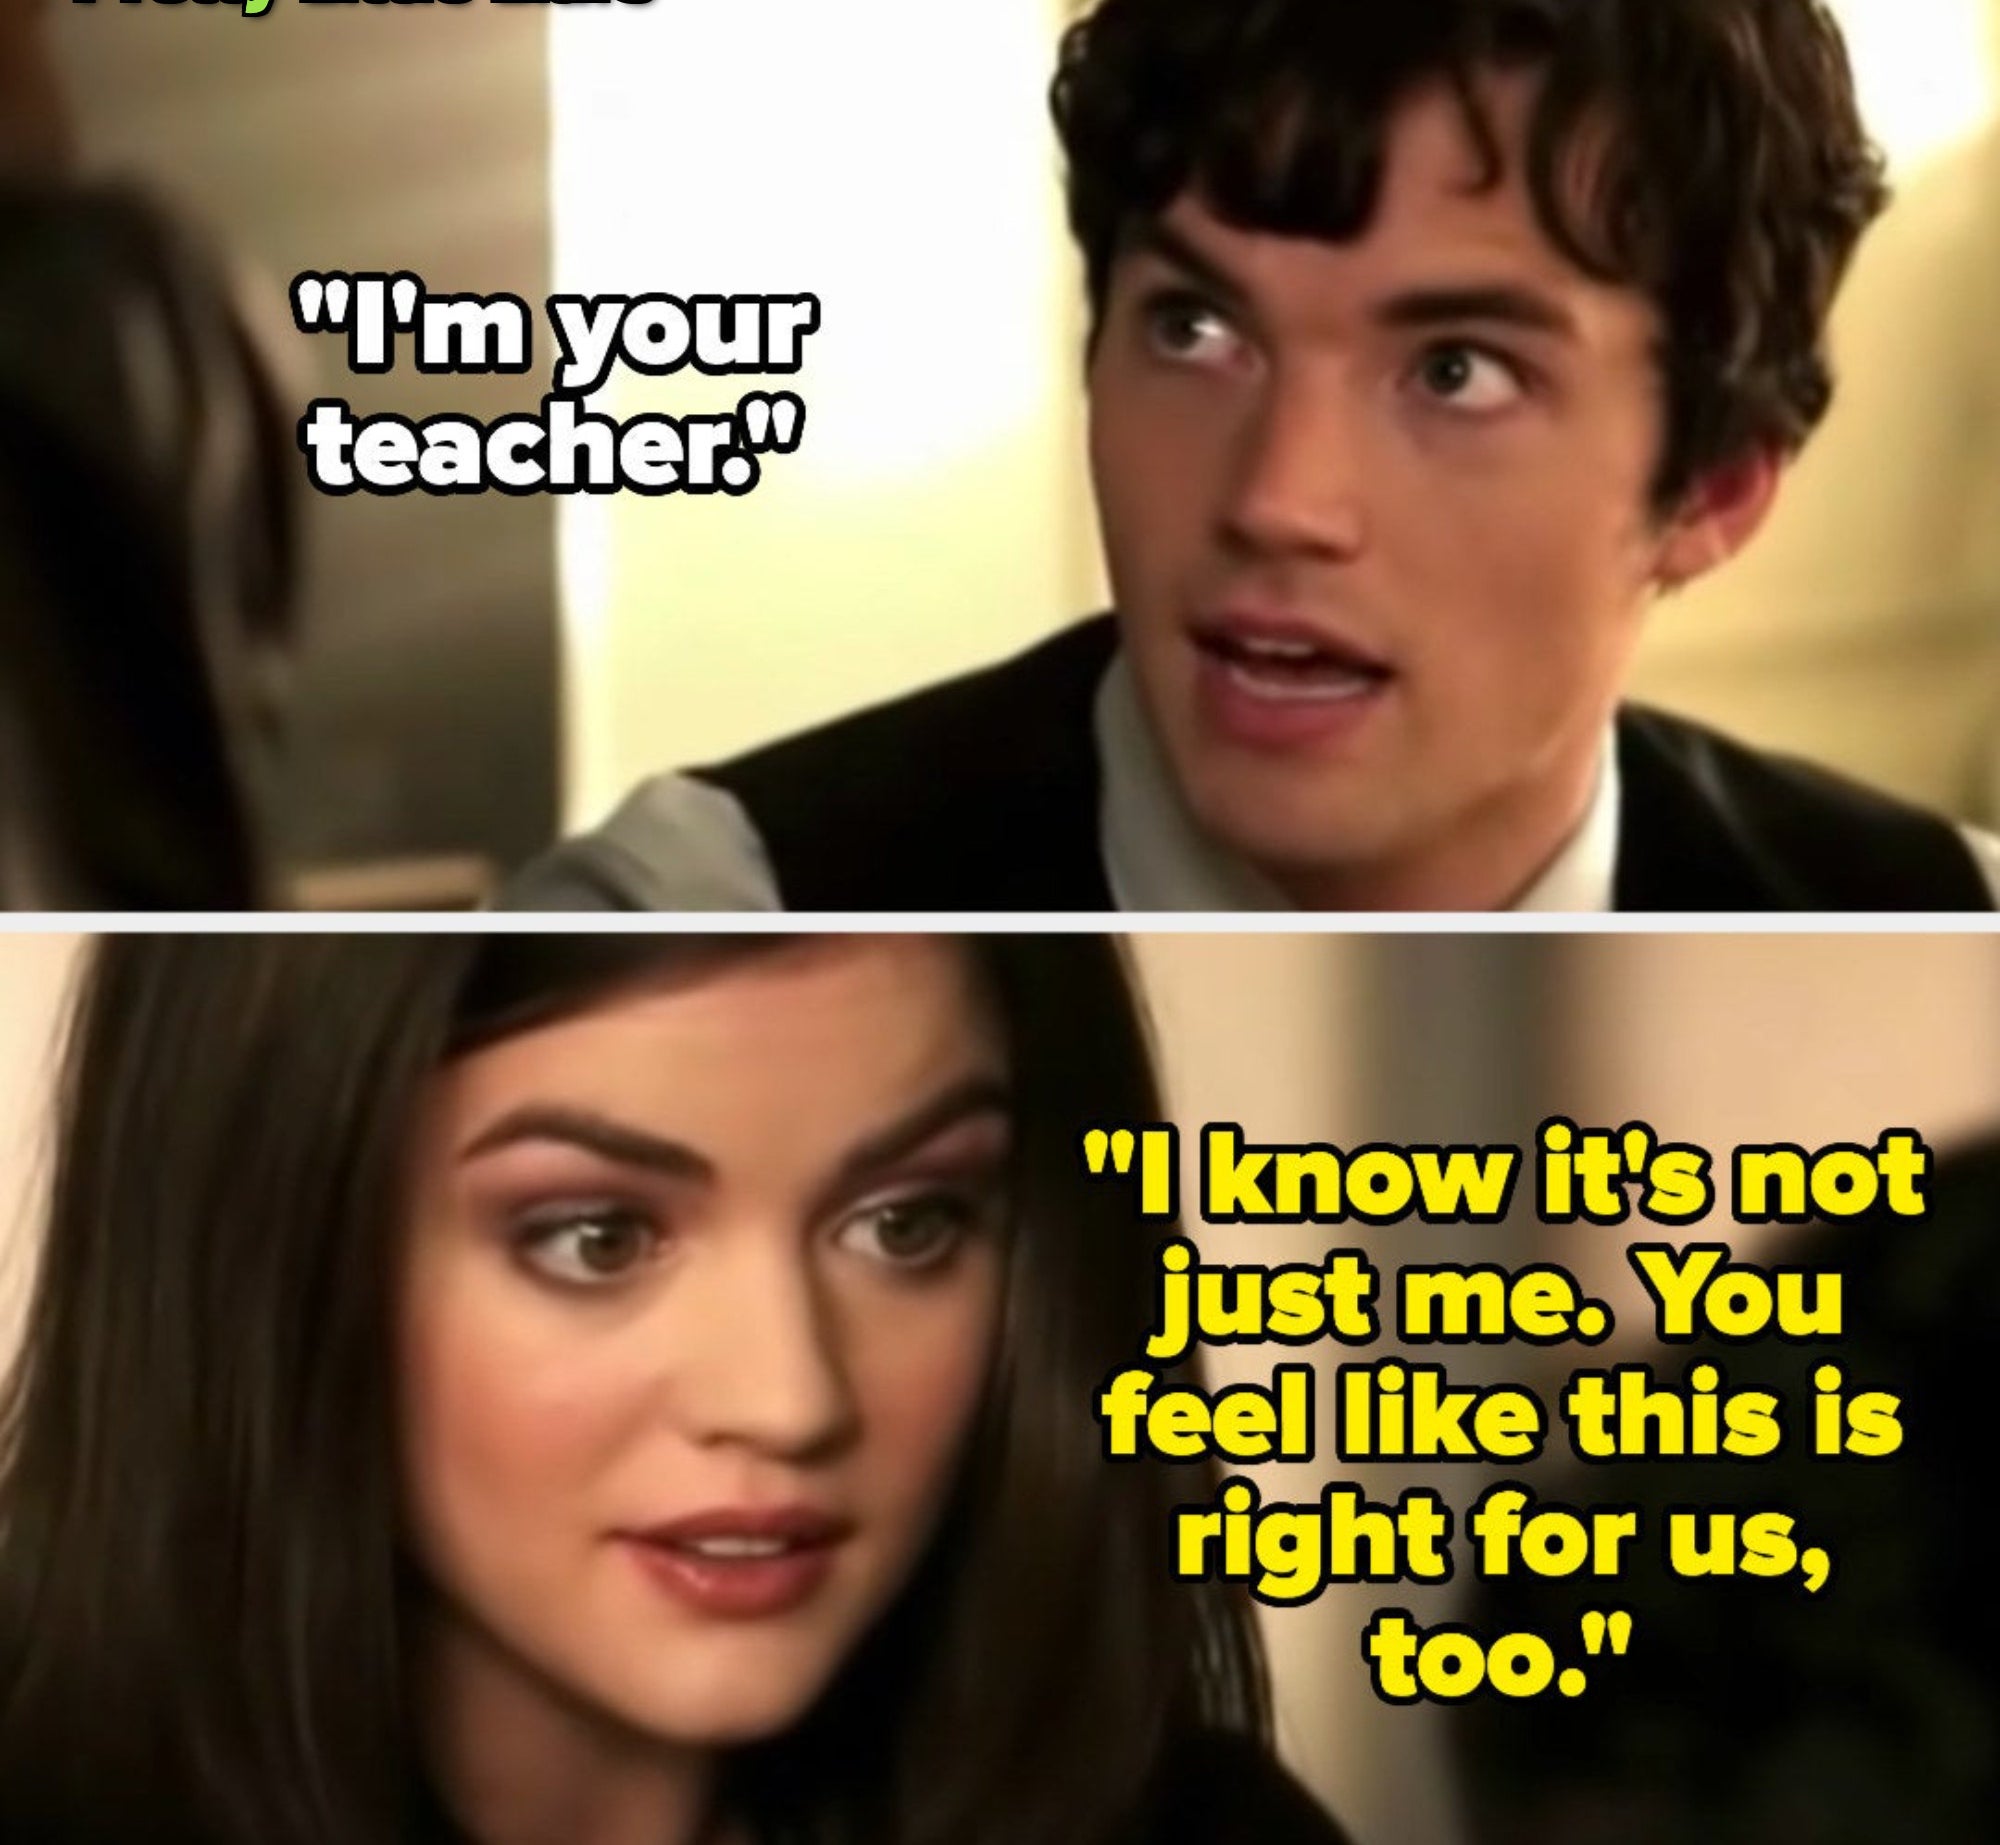 in &quot;Pretty Little Liars,&quot; Ezra tells Aria he&#x27;s her teacher, and she says she knows it&#x27;s not just her, and he feels like this is right for them too